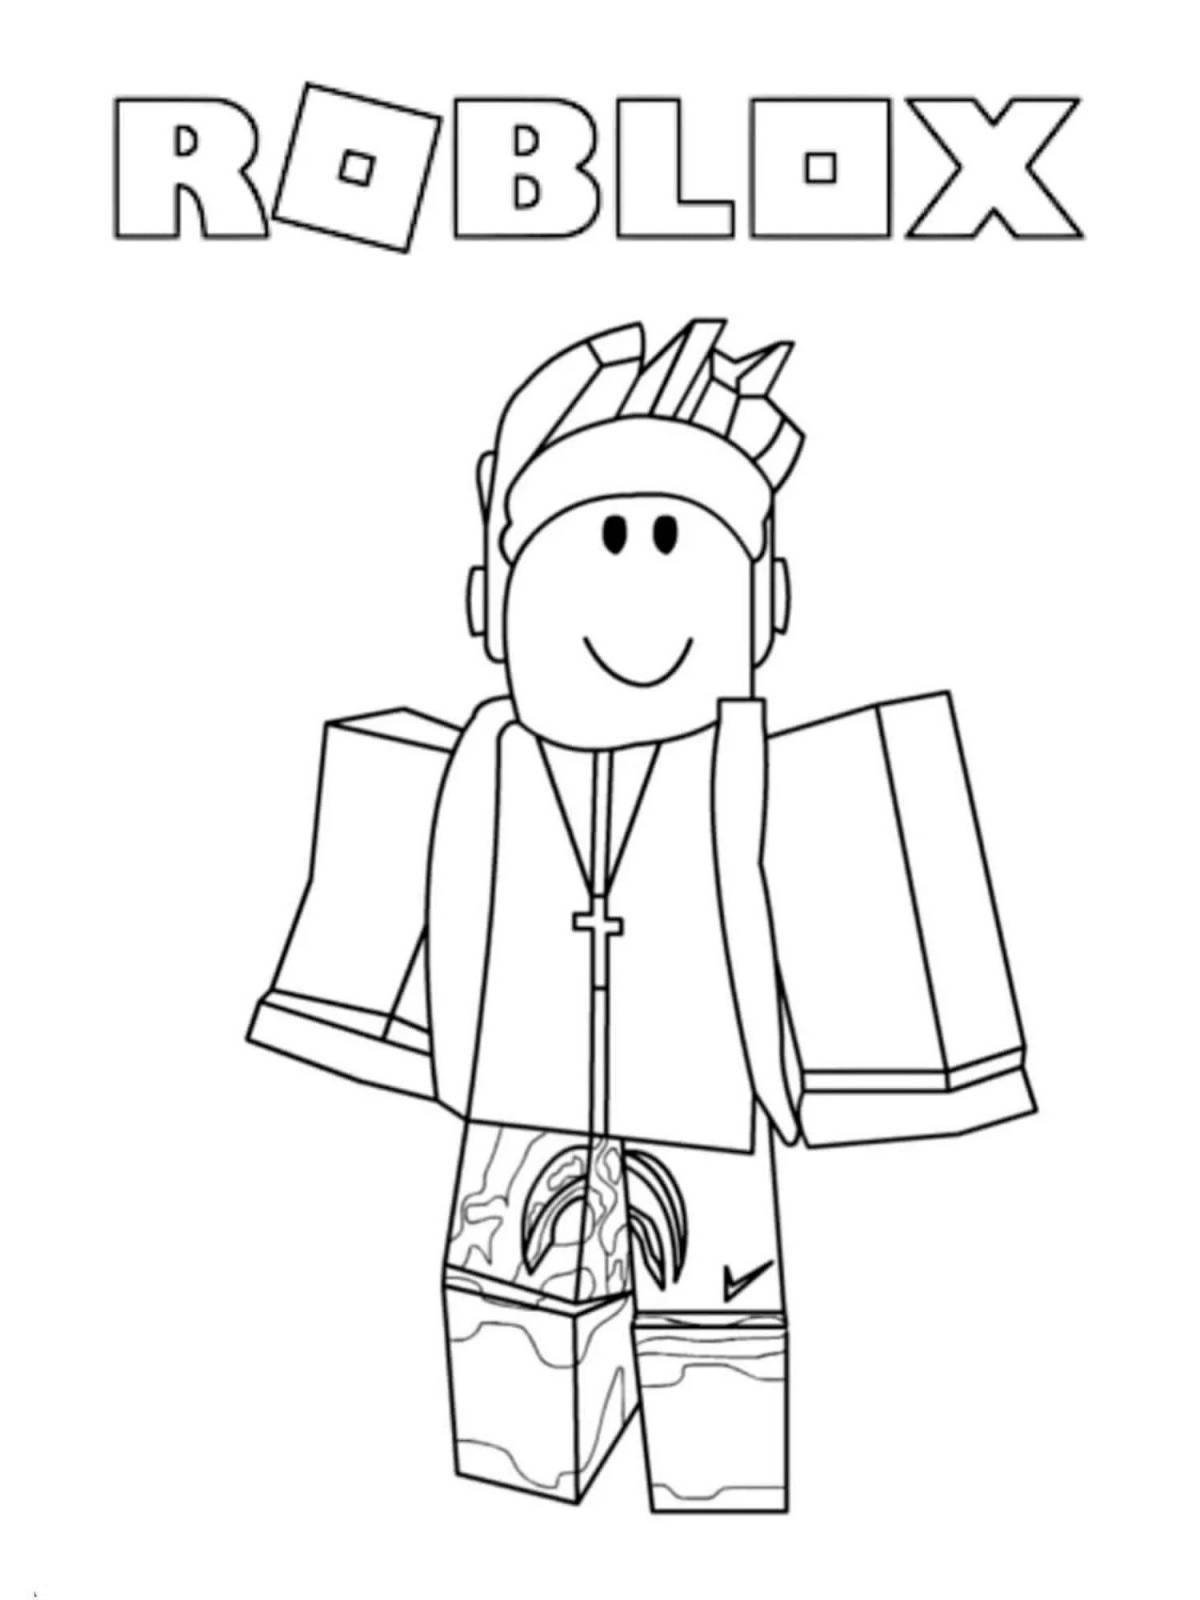 Vibrant roblox skins coloring page